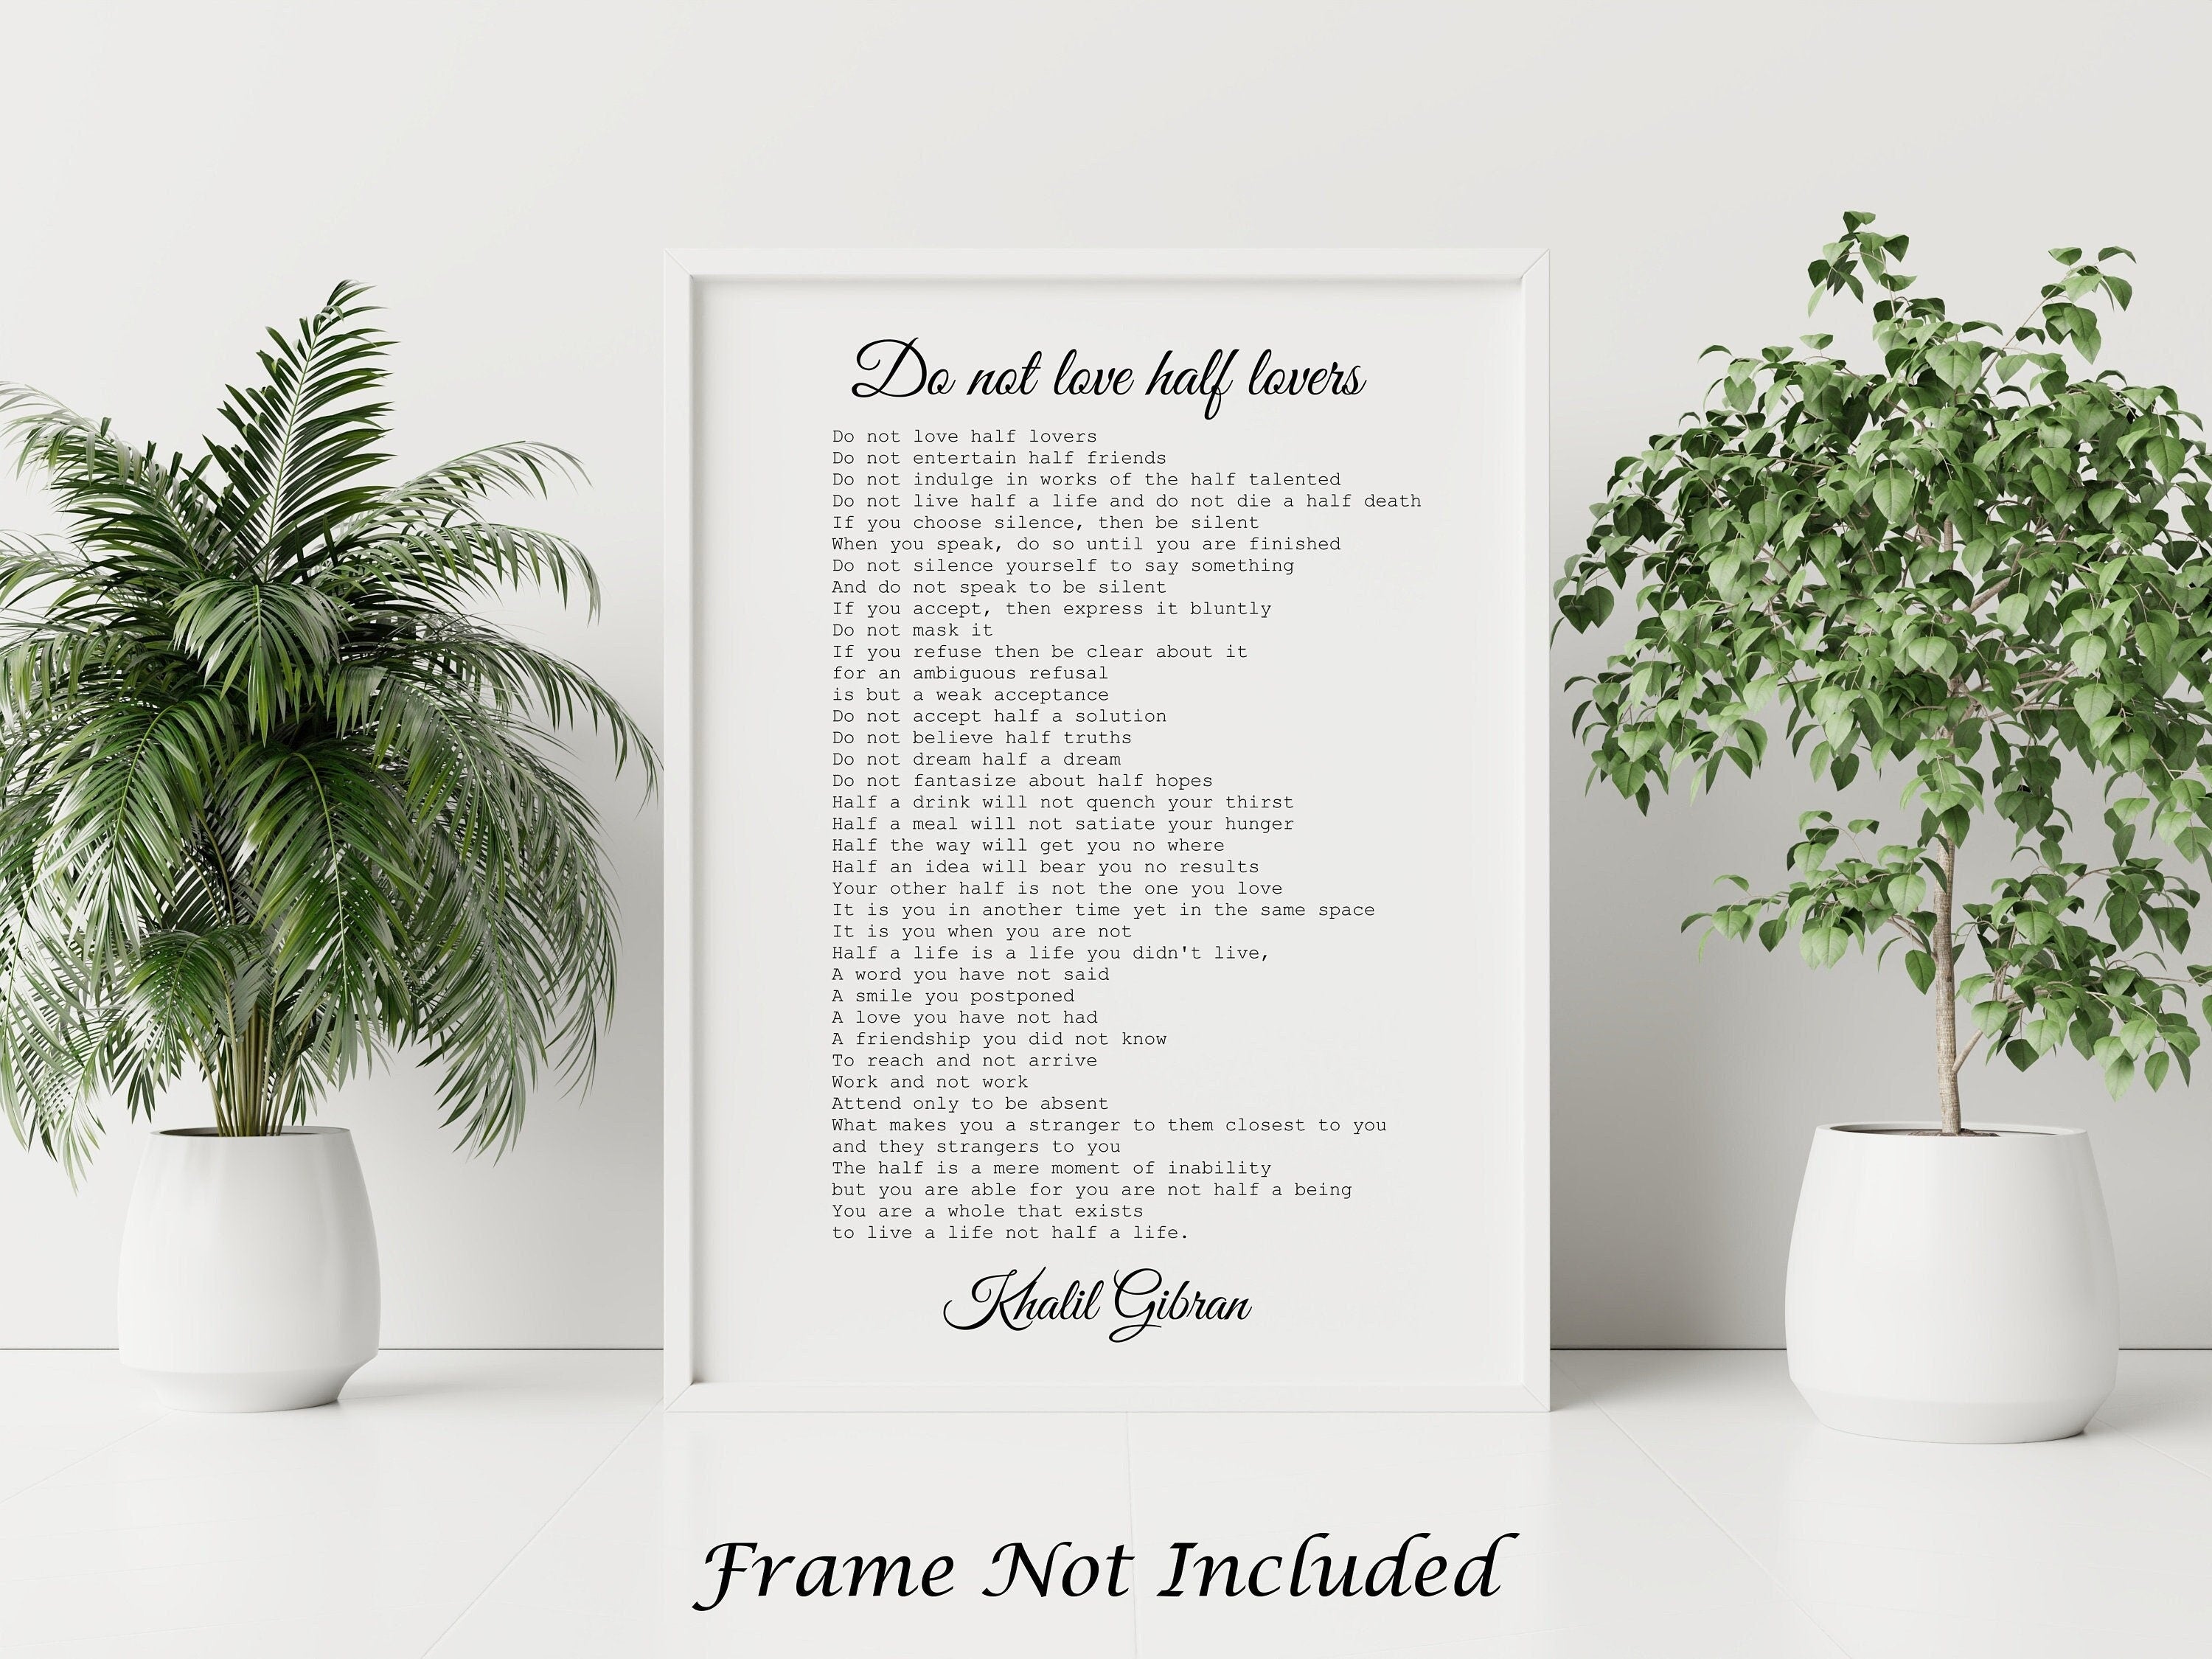 Do Not Love Half Lovers by Kahlil Gibran Poem Black & White Wall Art Poster  Print - Physical Art Print Without Frame